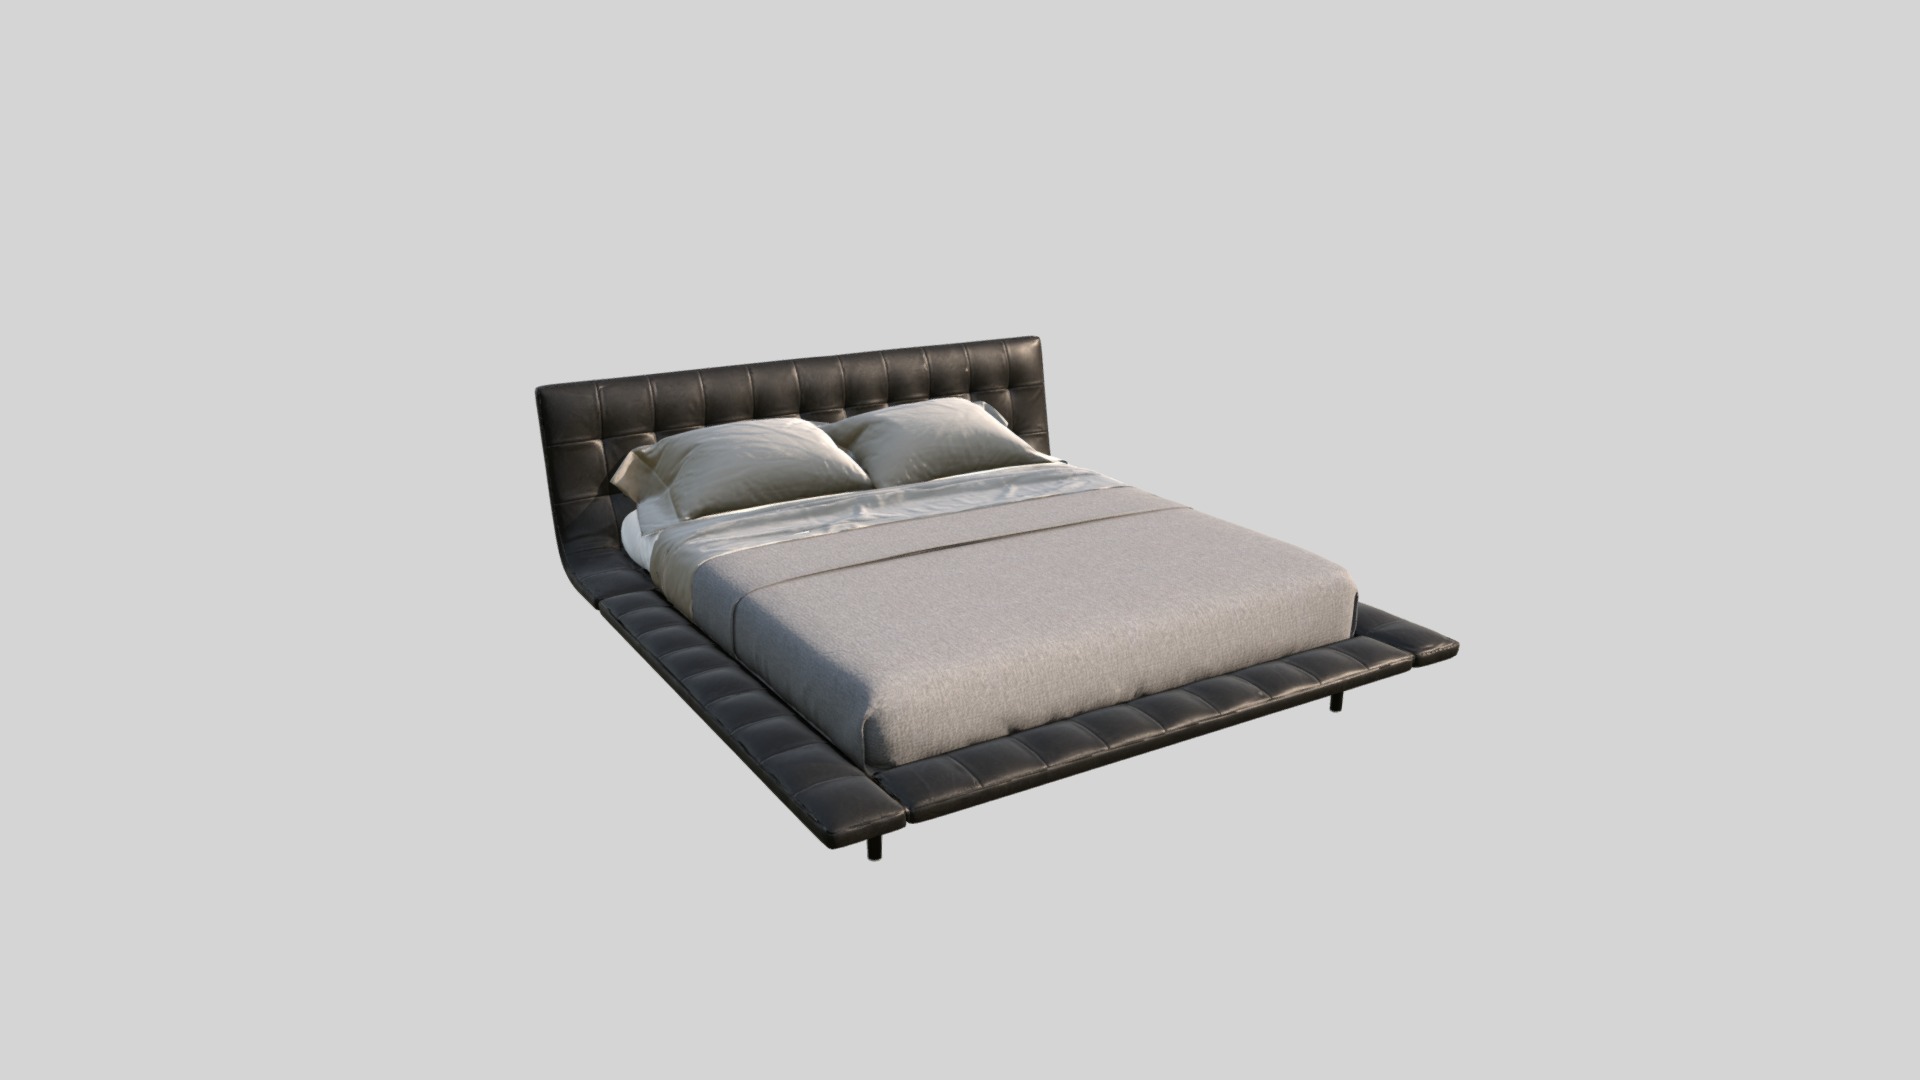 3D model Poliform Onda Bed SHP - This is a 3D model of the Poliform Onda Bed SHP. The 3D model is about a grey couch with a grey cushion.